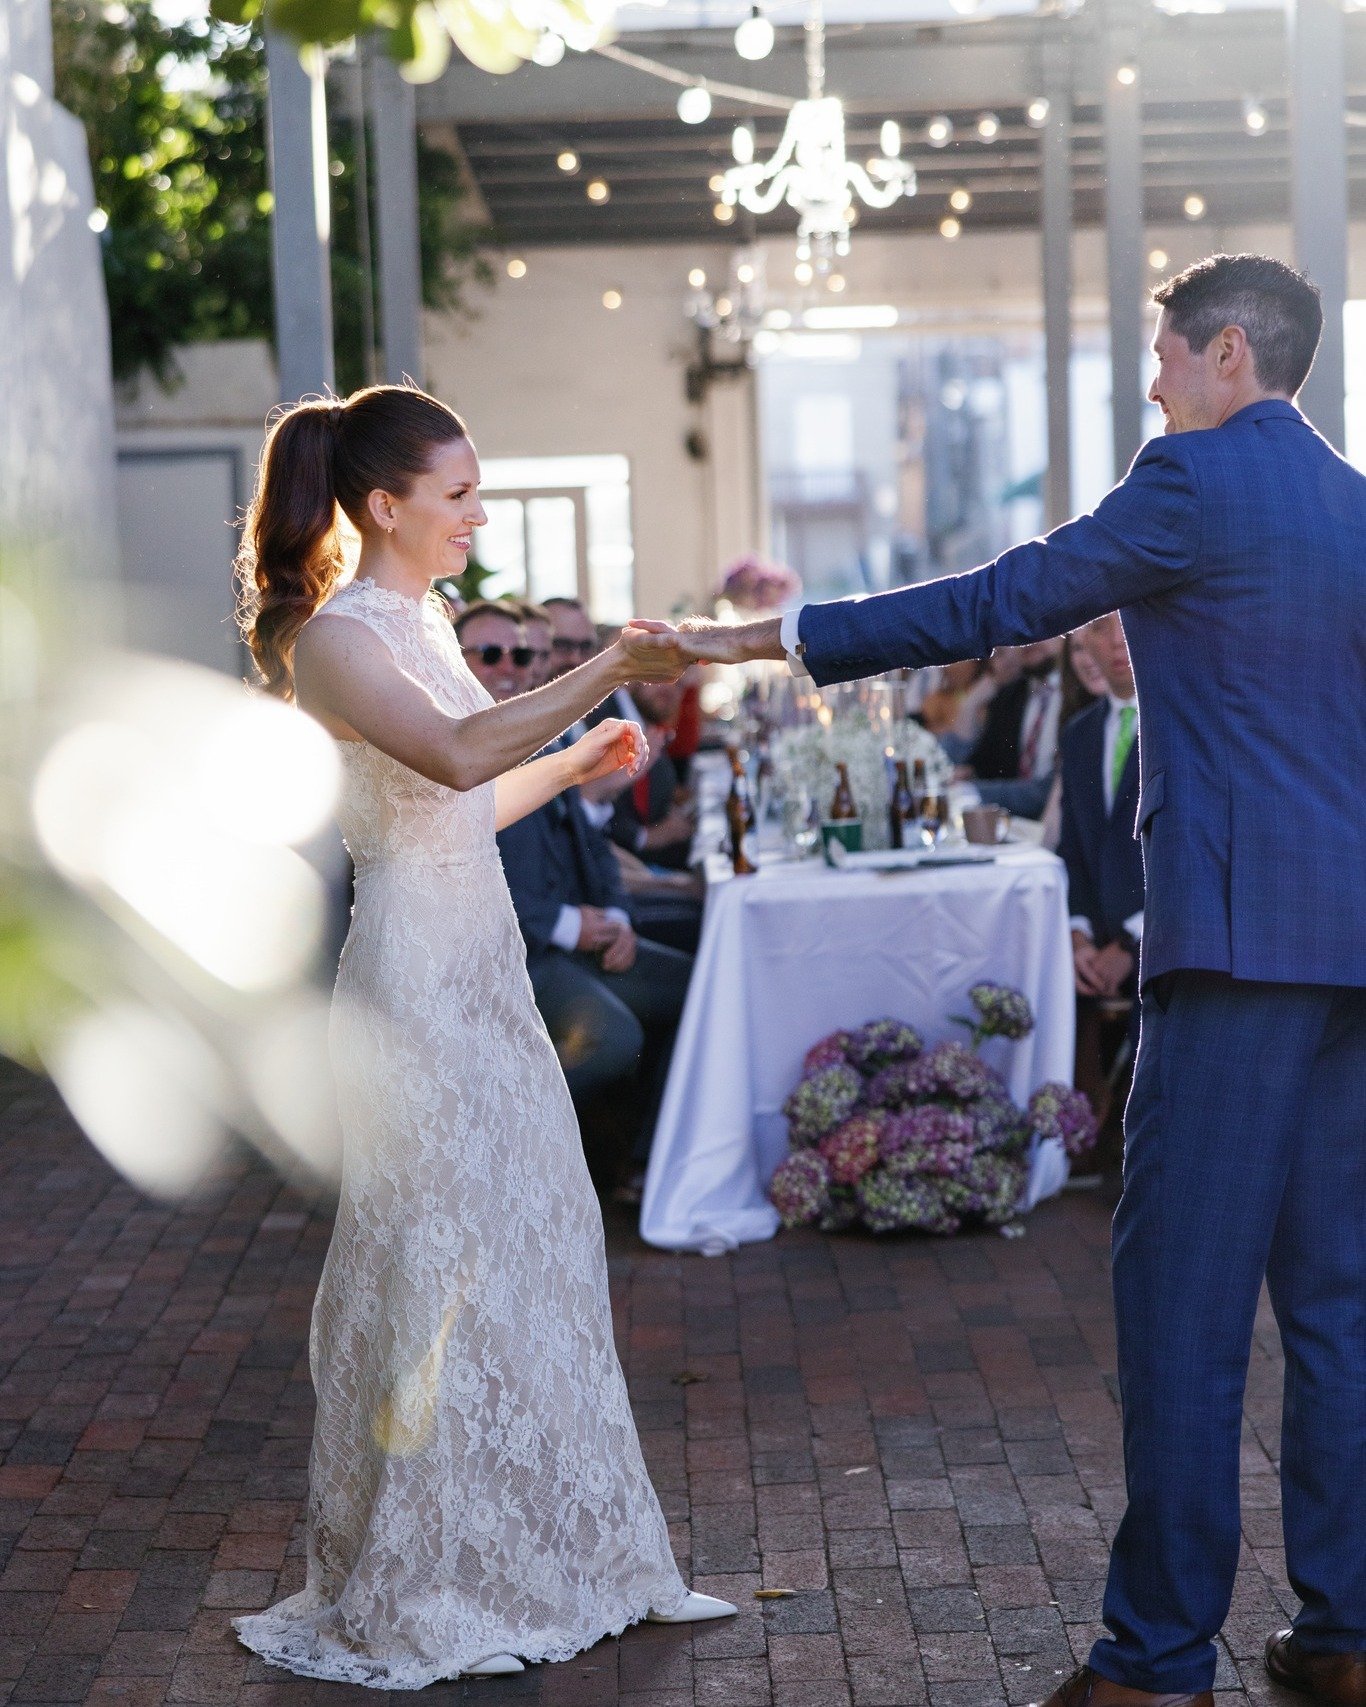 Wedding of The Month | Brooke &amp; Tyler 

This dreamy outdoor wedding was at one of our favorite Wilmington venues, @atriumwilmington and every detail (especially their florals) was utter perfection. To see all the details from their day, click thr